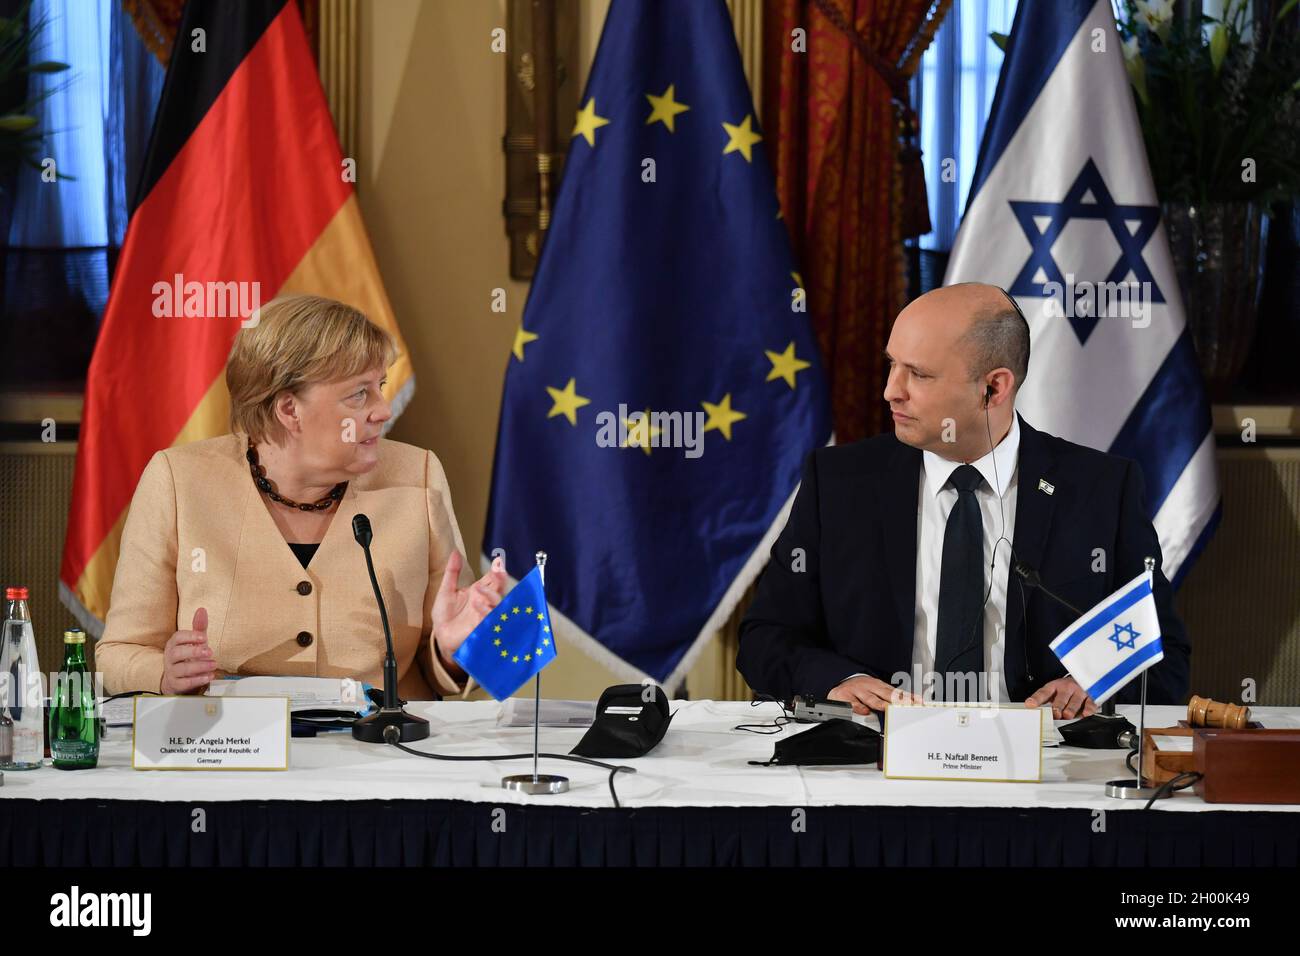 Jerusalem. 10th Oct, 2021. Israeli Prime Minister Naftali Bennett (R) meets with German Chancellor Angela Merkel at the King David Hotel in Jerusalem, Oct. 10, 2021. Germany's outgoing Chancellor Angela Merkel kick-started her visit to Israel on Sunday morning, marking her final official trip to the country before she leaves office. Credit: Yoav Dudkevitch/JINI via Xinhua/Alamy Live News Stock Photo